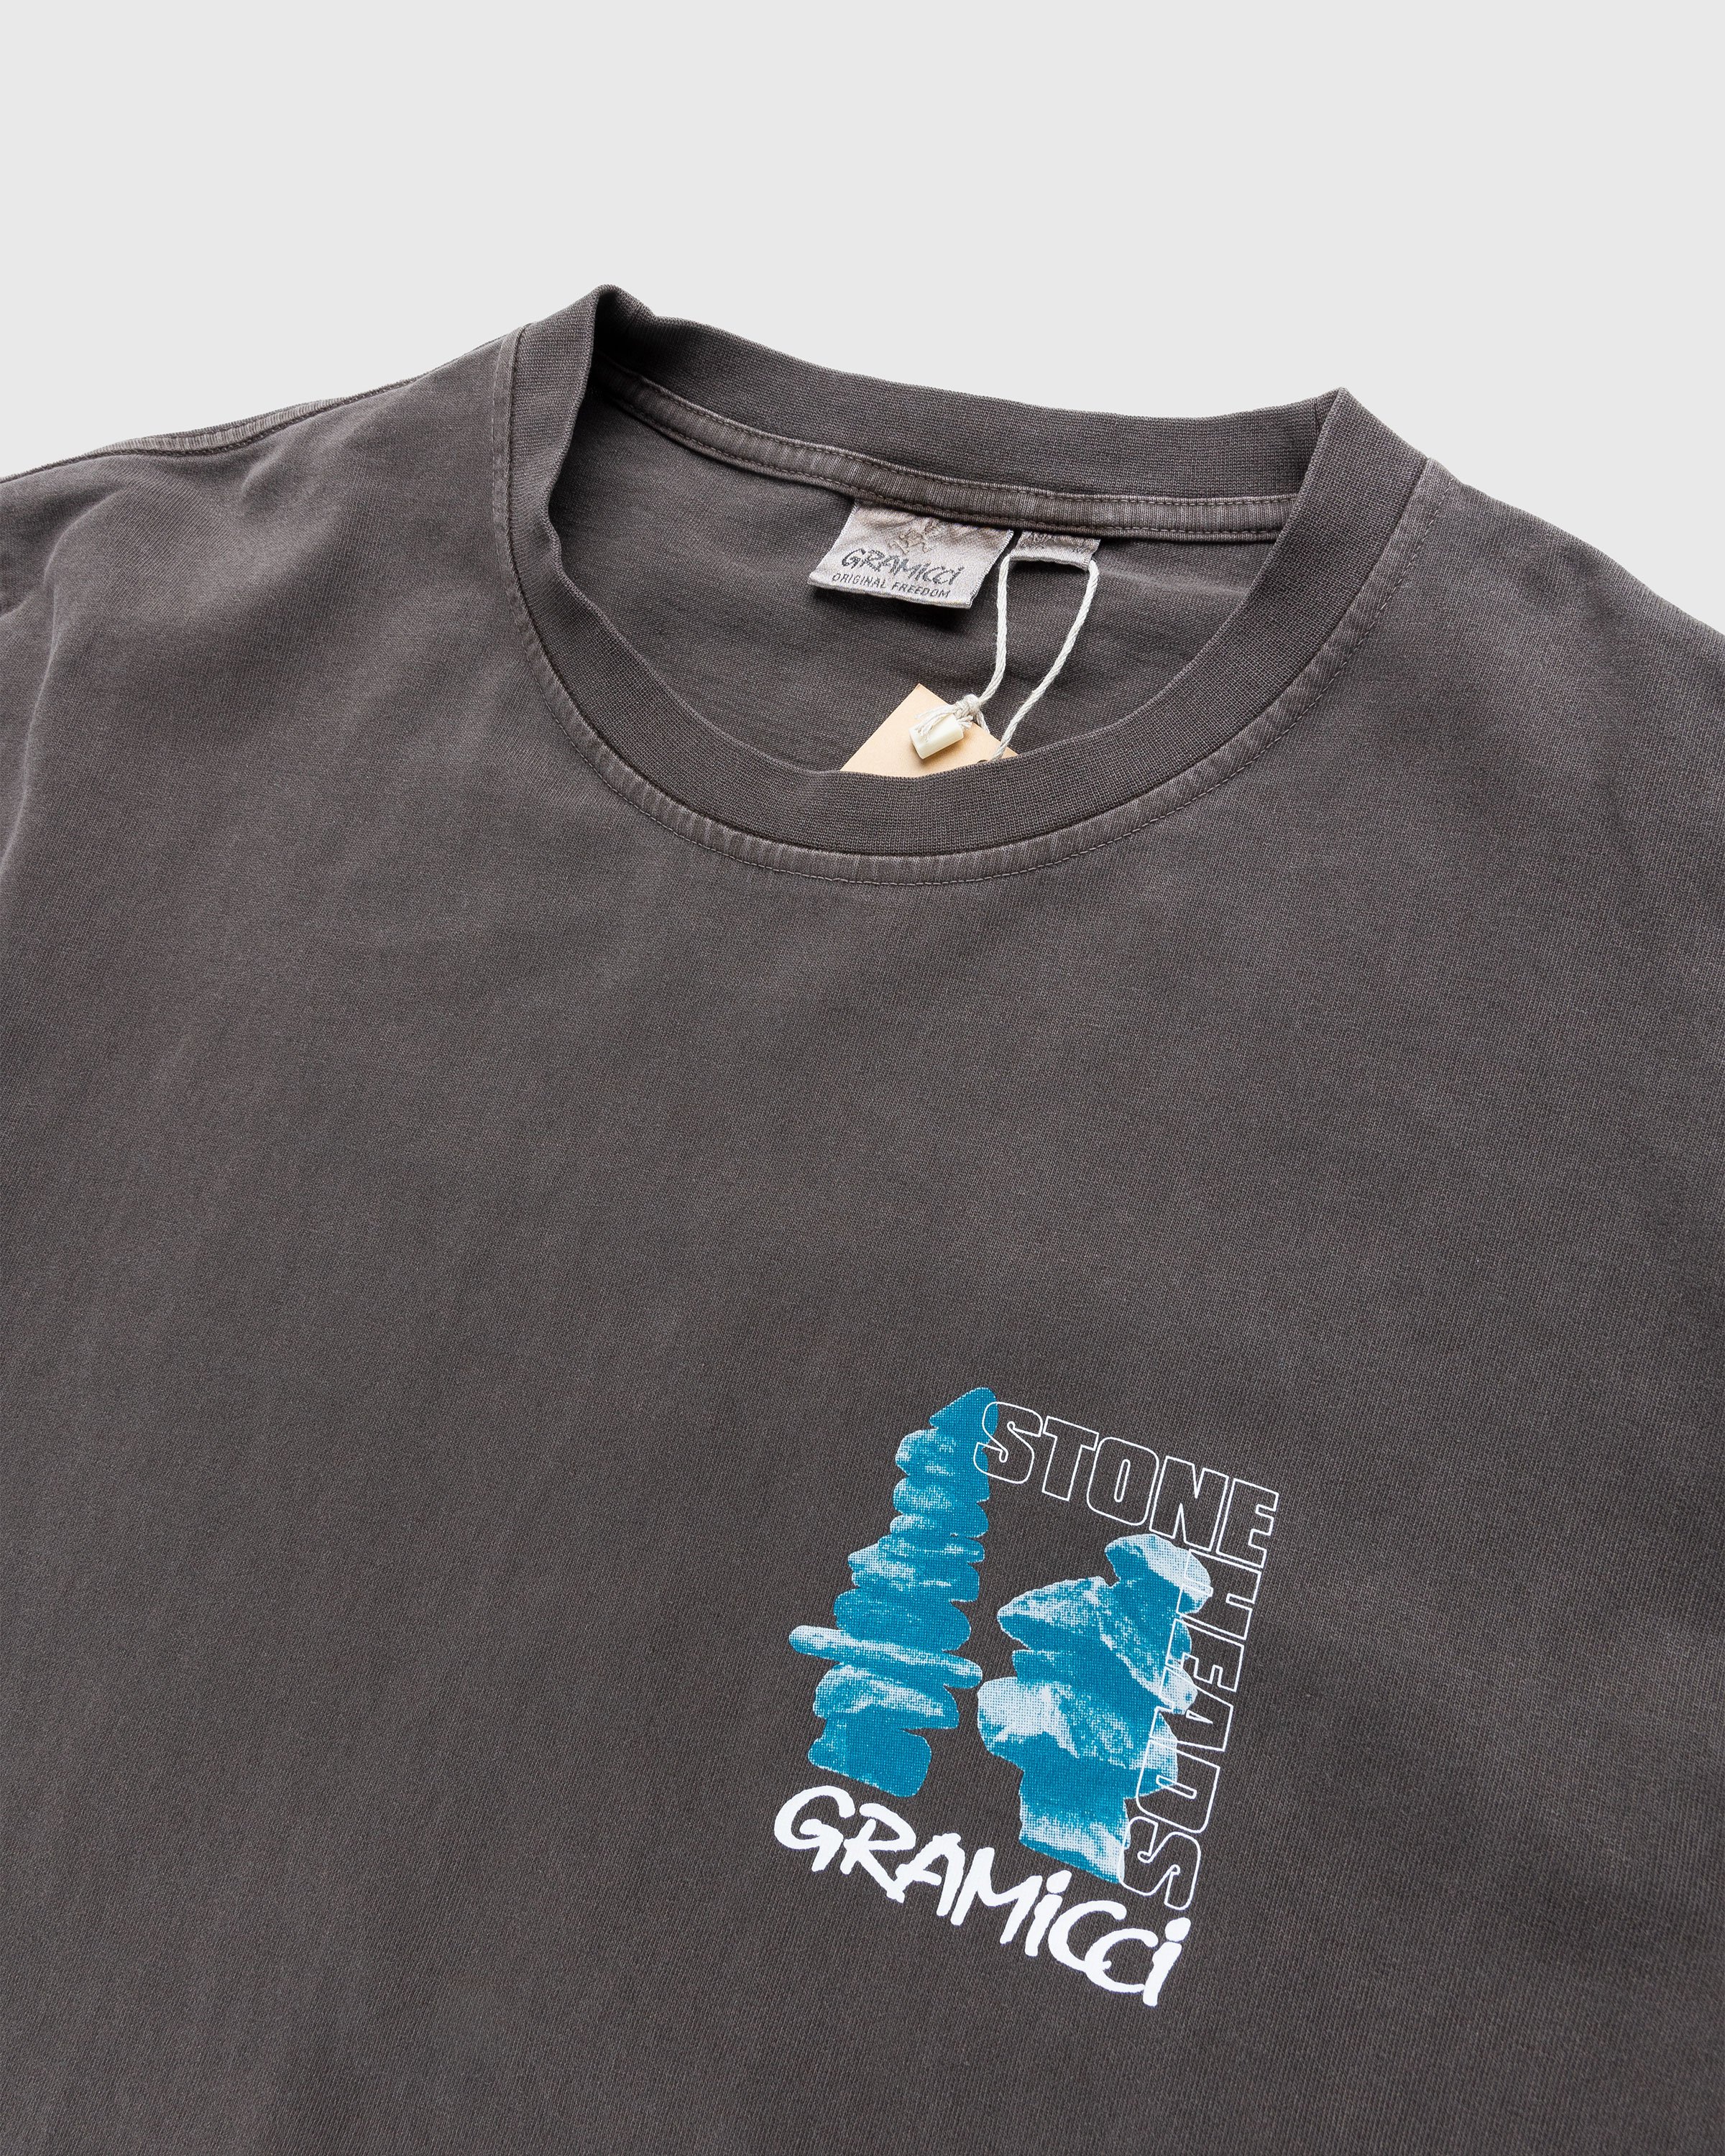 Gramicci - Stoneheads Longsleeve Tee Brown Pigment - Clothing - Brown - Image 5